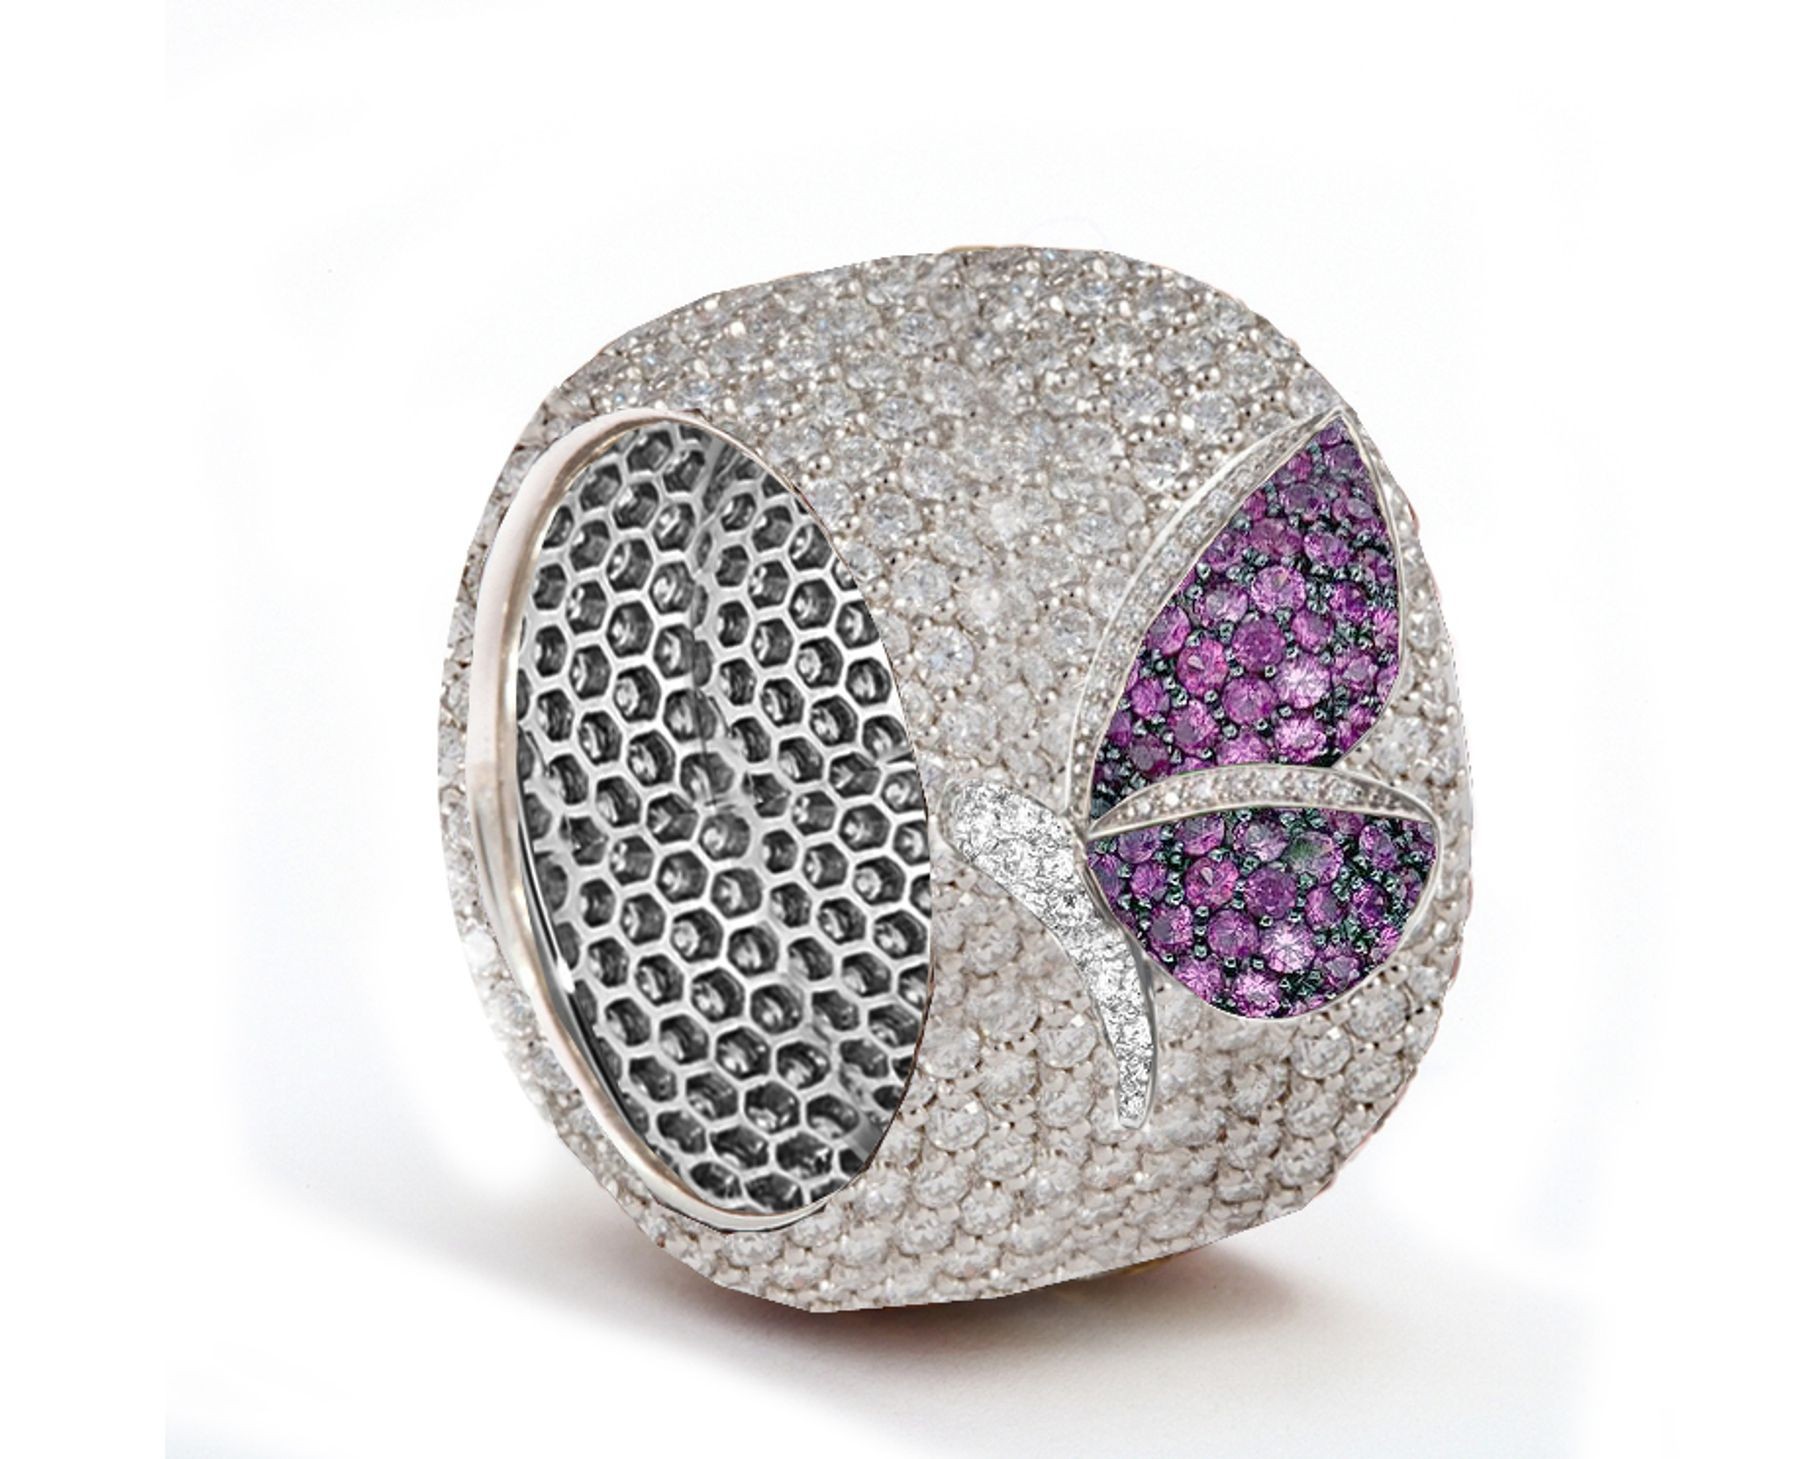 Delicate French pavee Sparkling Brilliant-Cut Round Diamonds & Vivid Multi-Colored Precious Stones Eternity Rings & Bands Featuring Butterflies, Moon & Stars